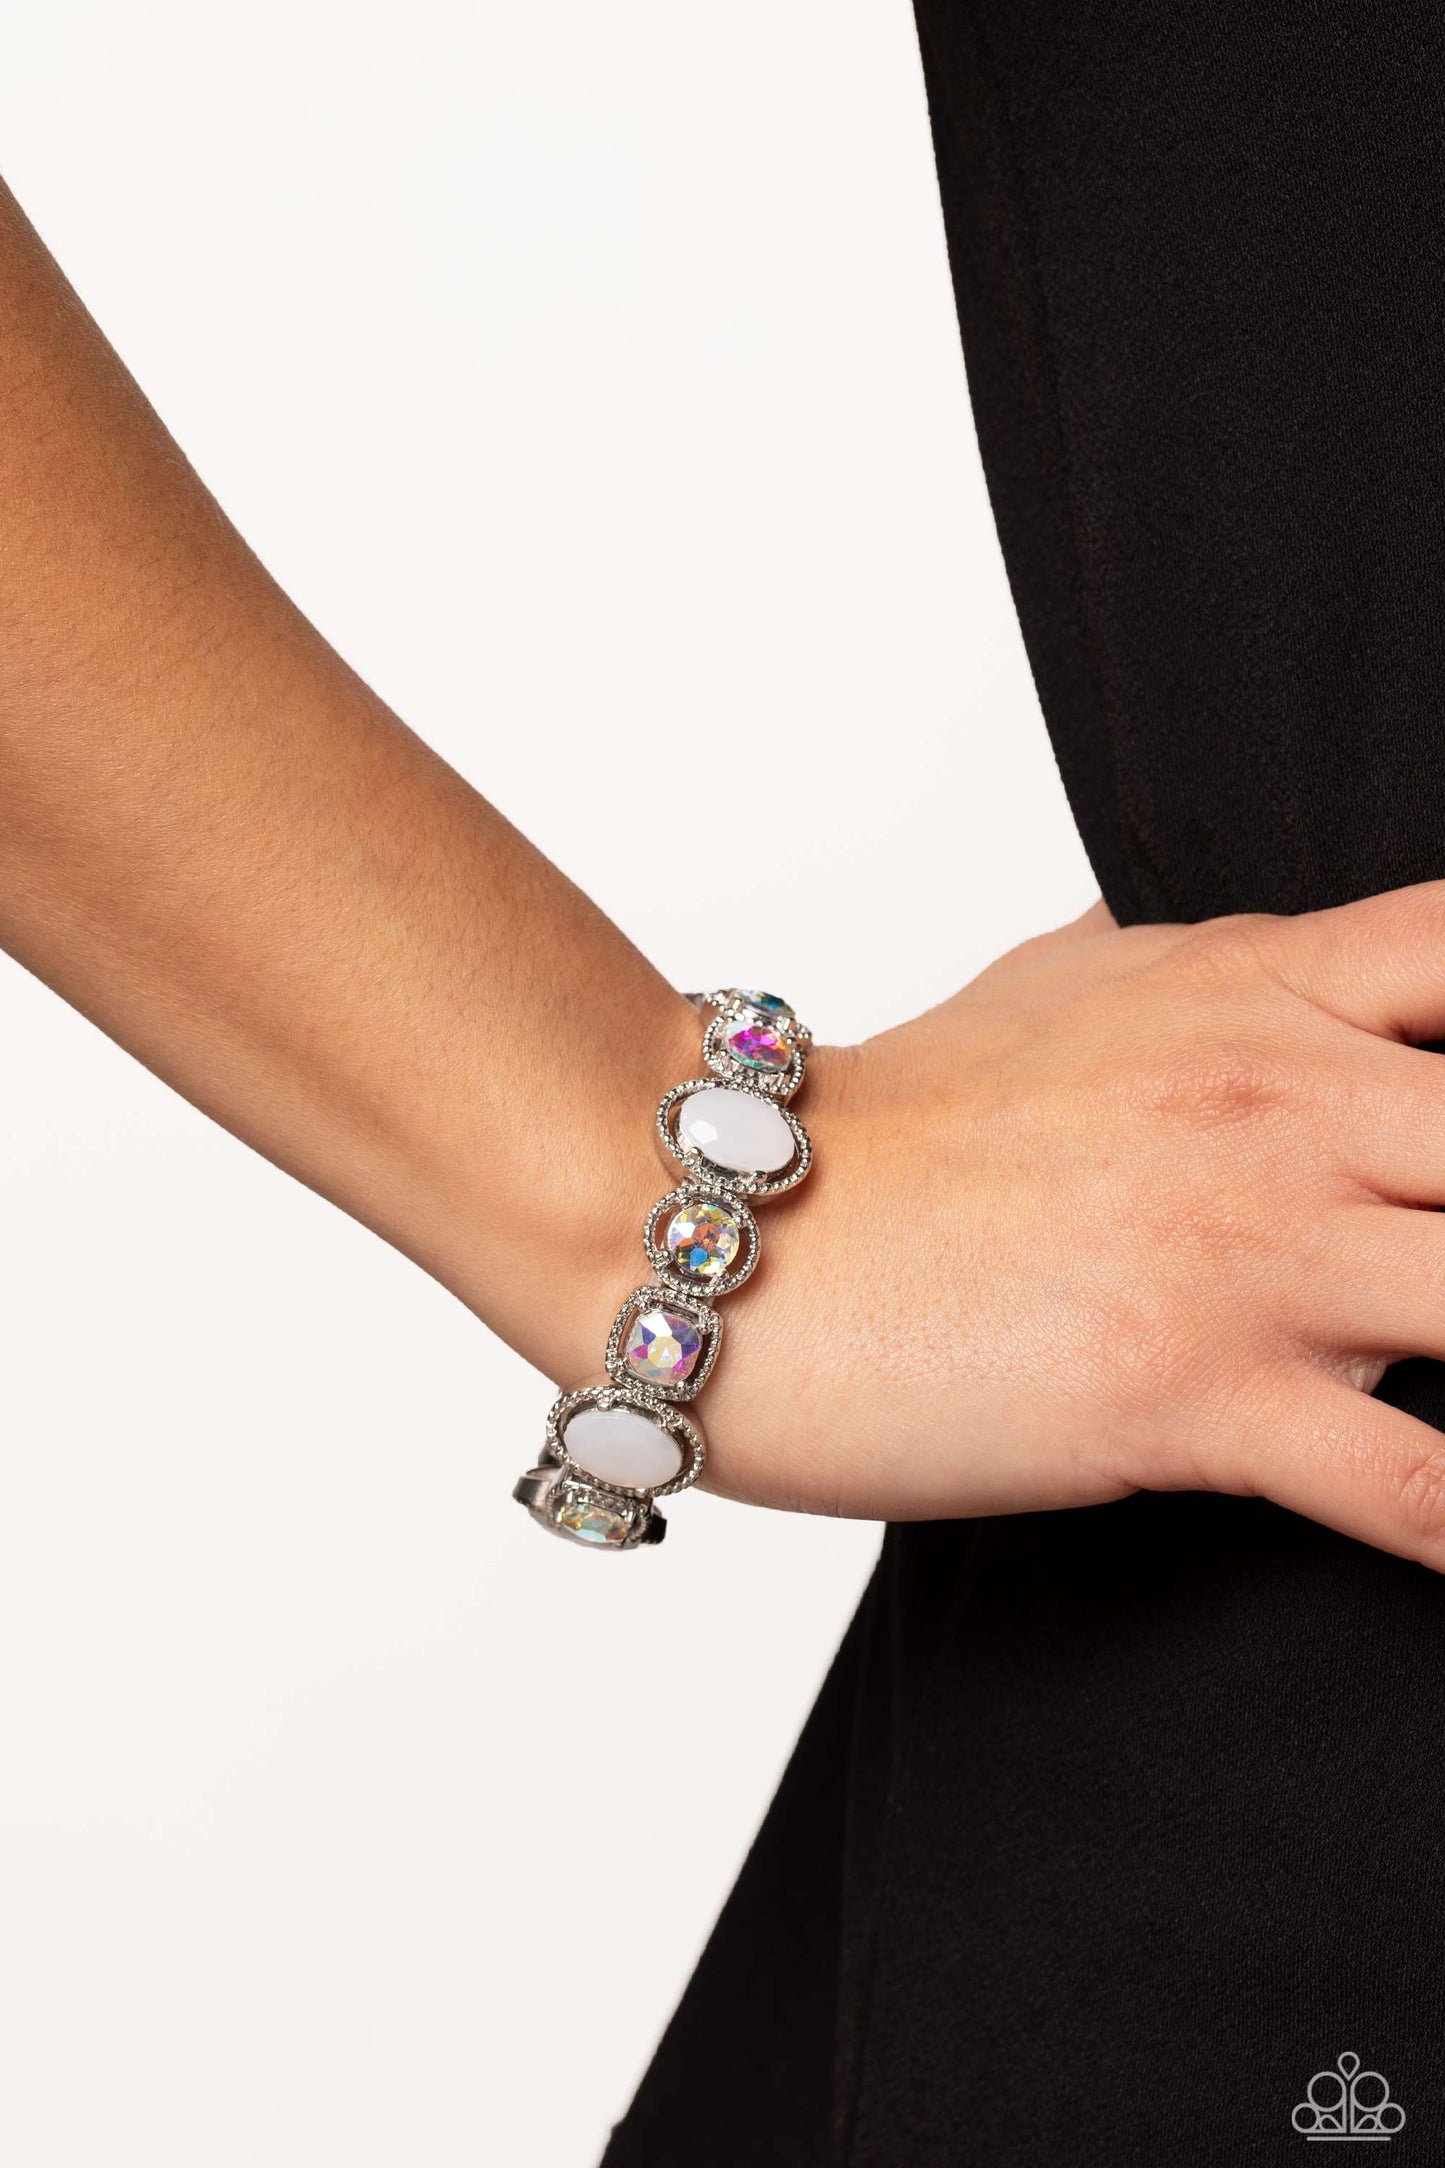 Paparazzi Accessories Fashion Fairy Tale - White Pressed in the center of pronged and studded thick silver oval, circular, and square frames, iridescent gems and milky white beads alternate around the wrist on elastic stretchy bands for a refined, geometr